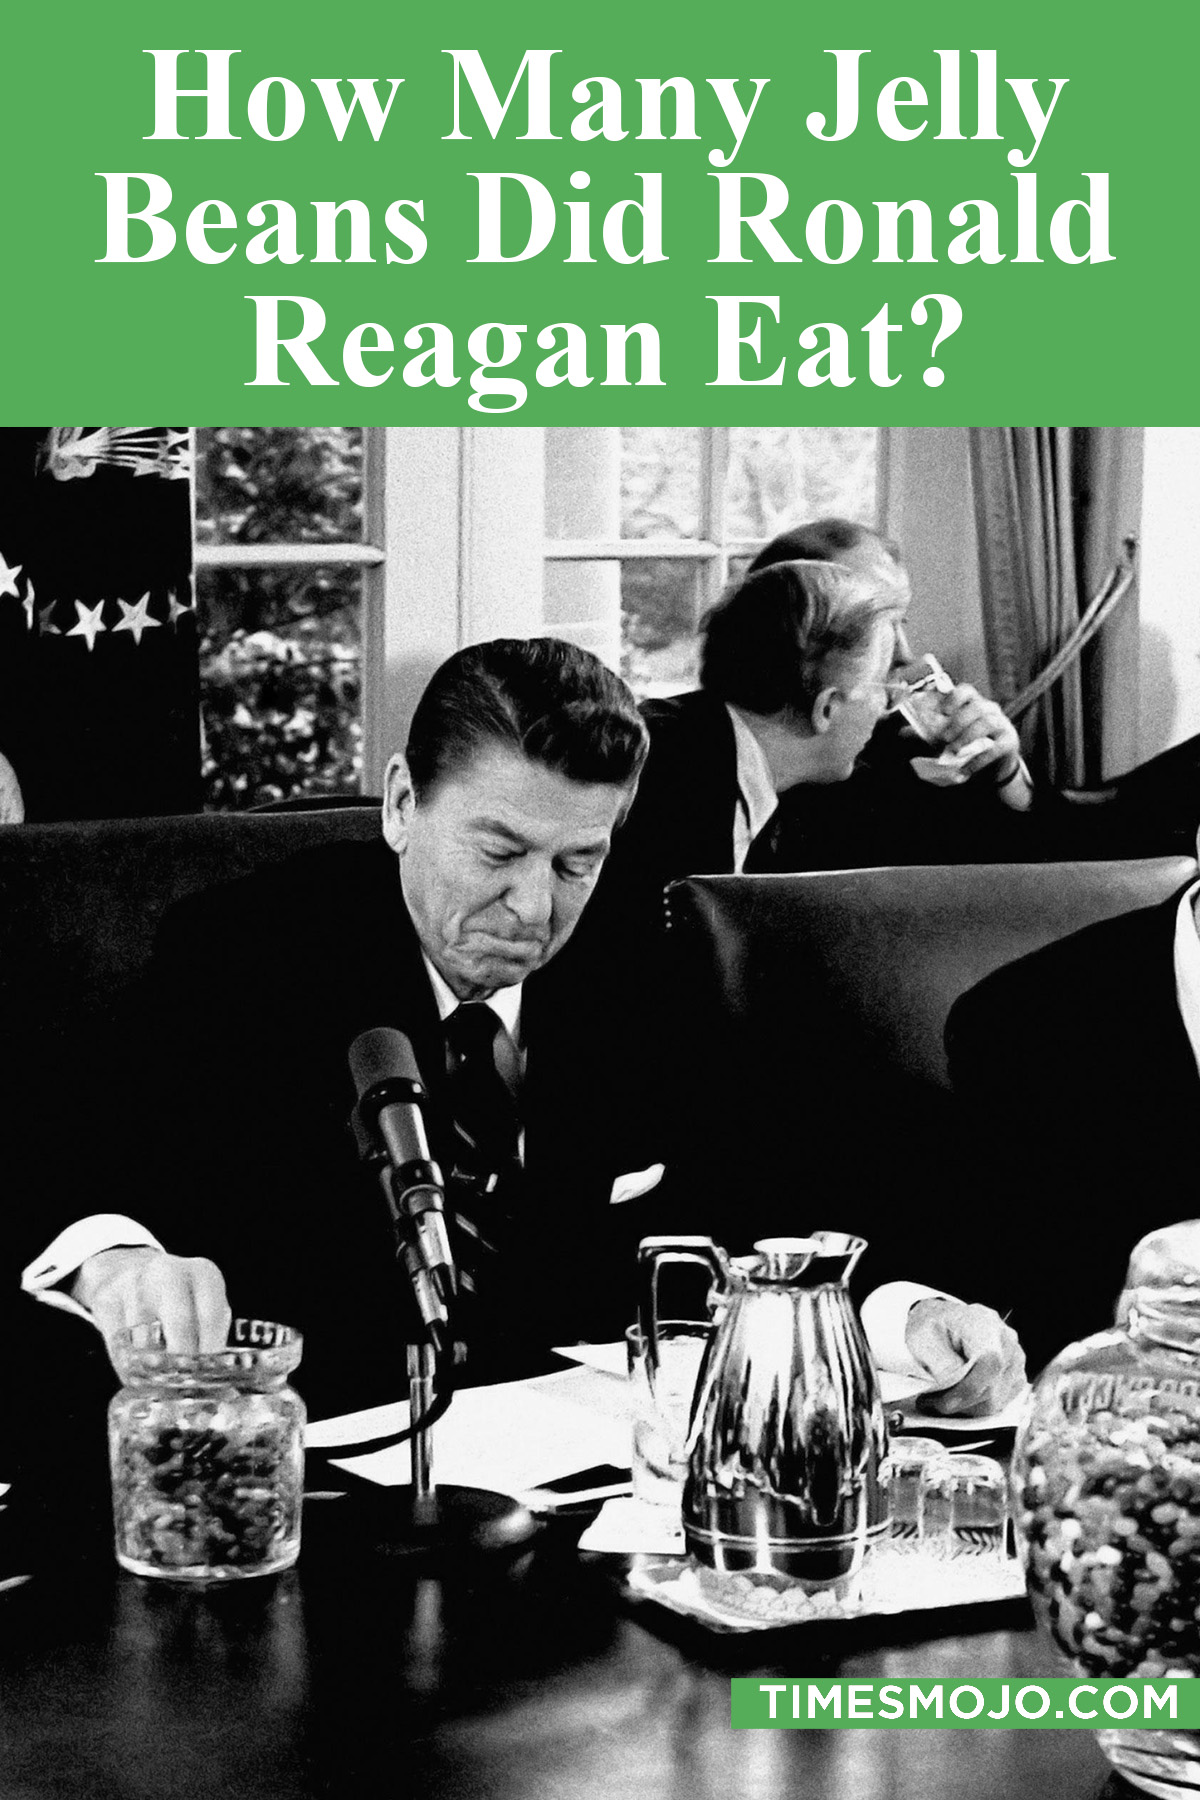 How Many Jelly Beans Did Ronald Reagan Eat